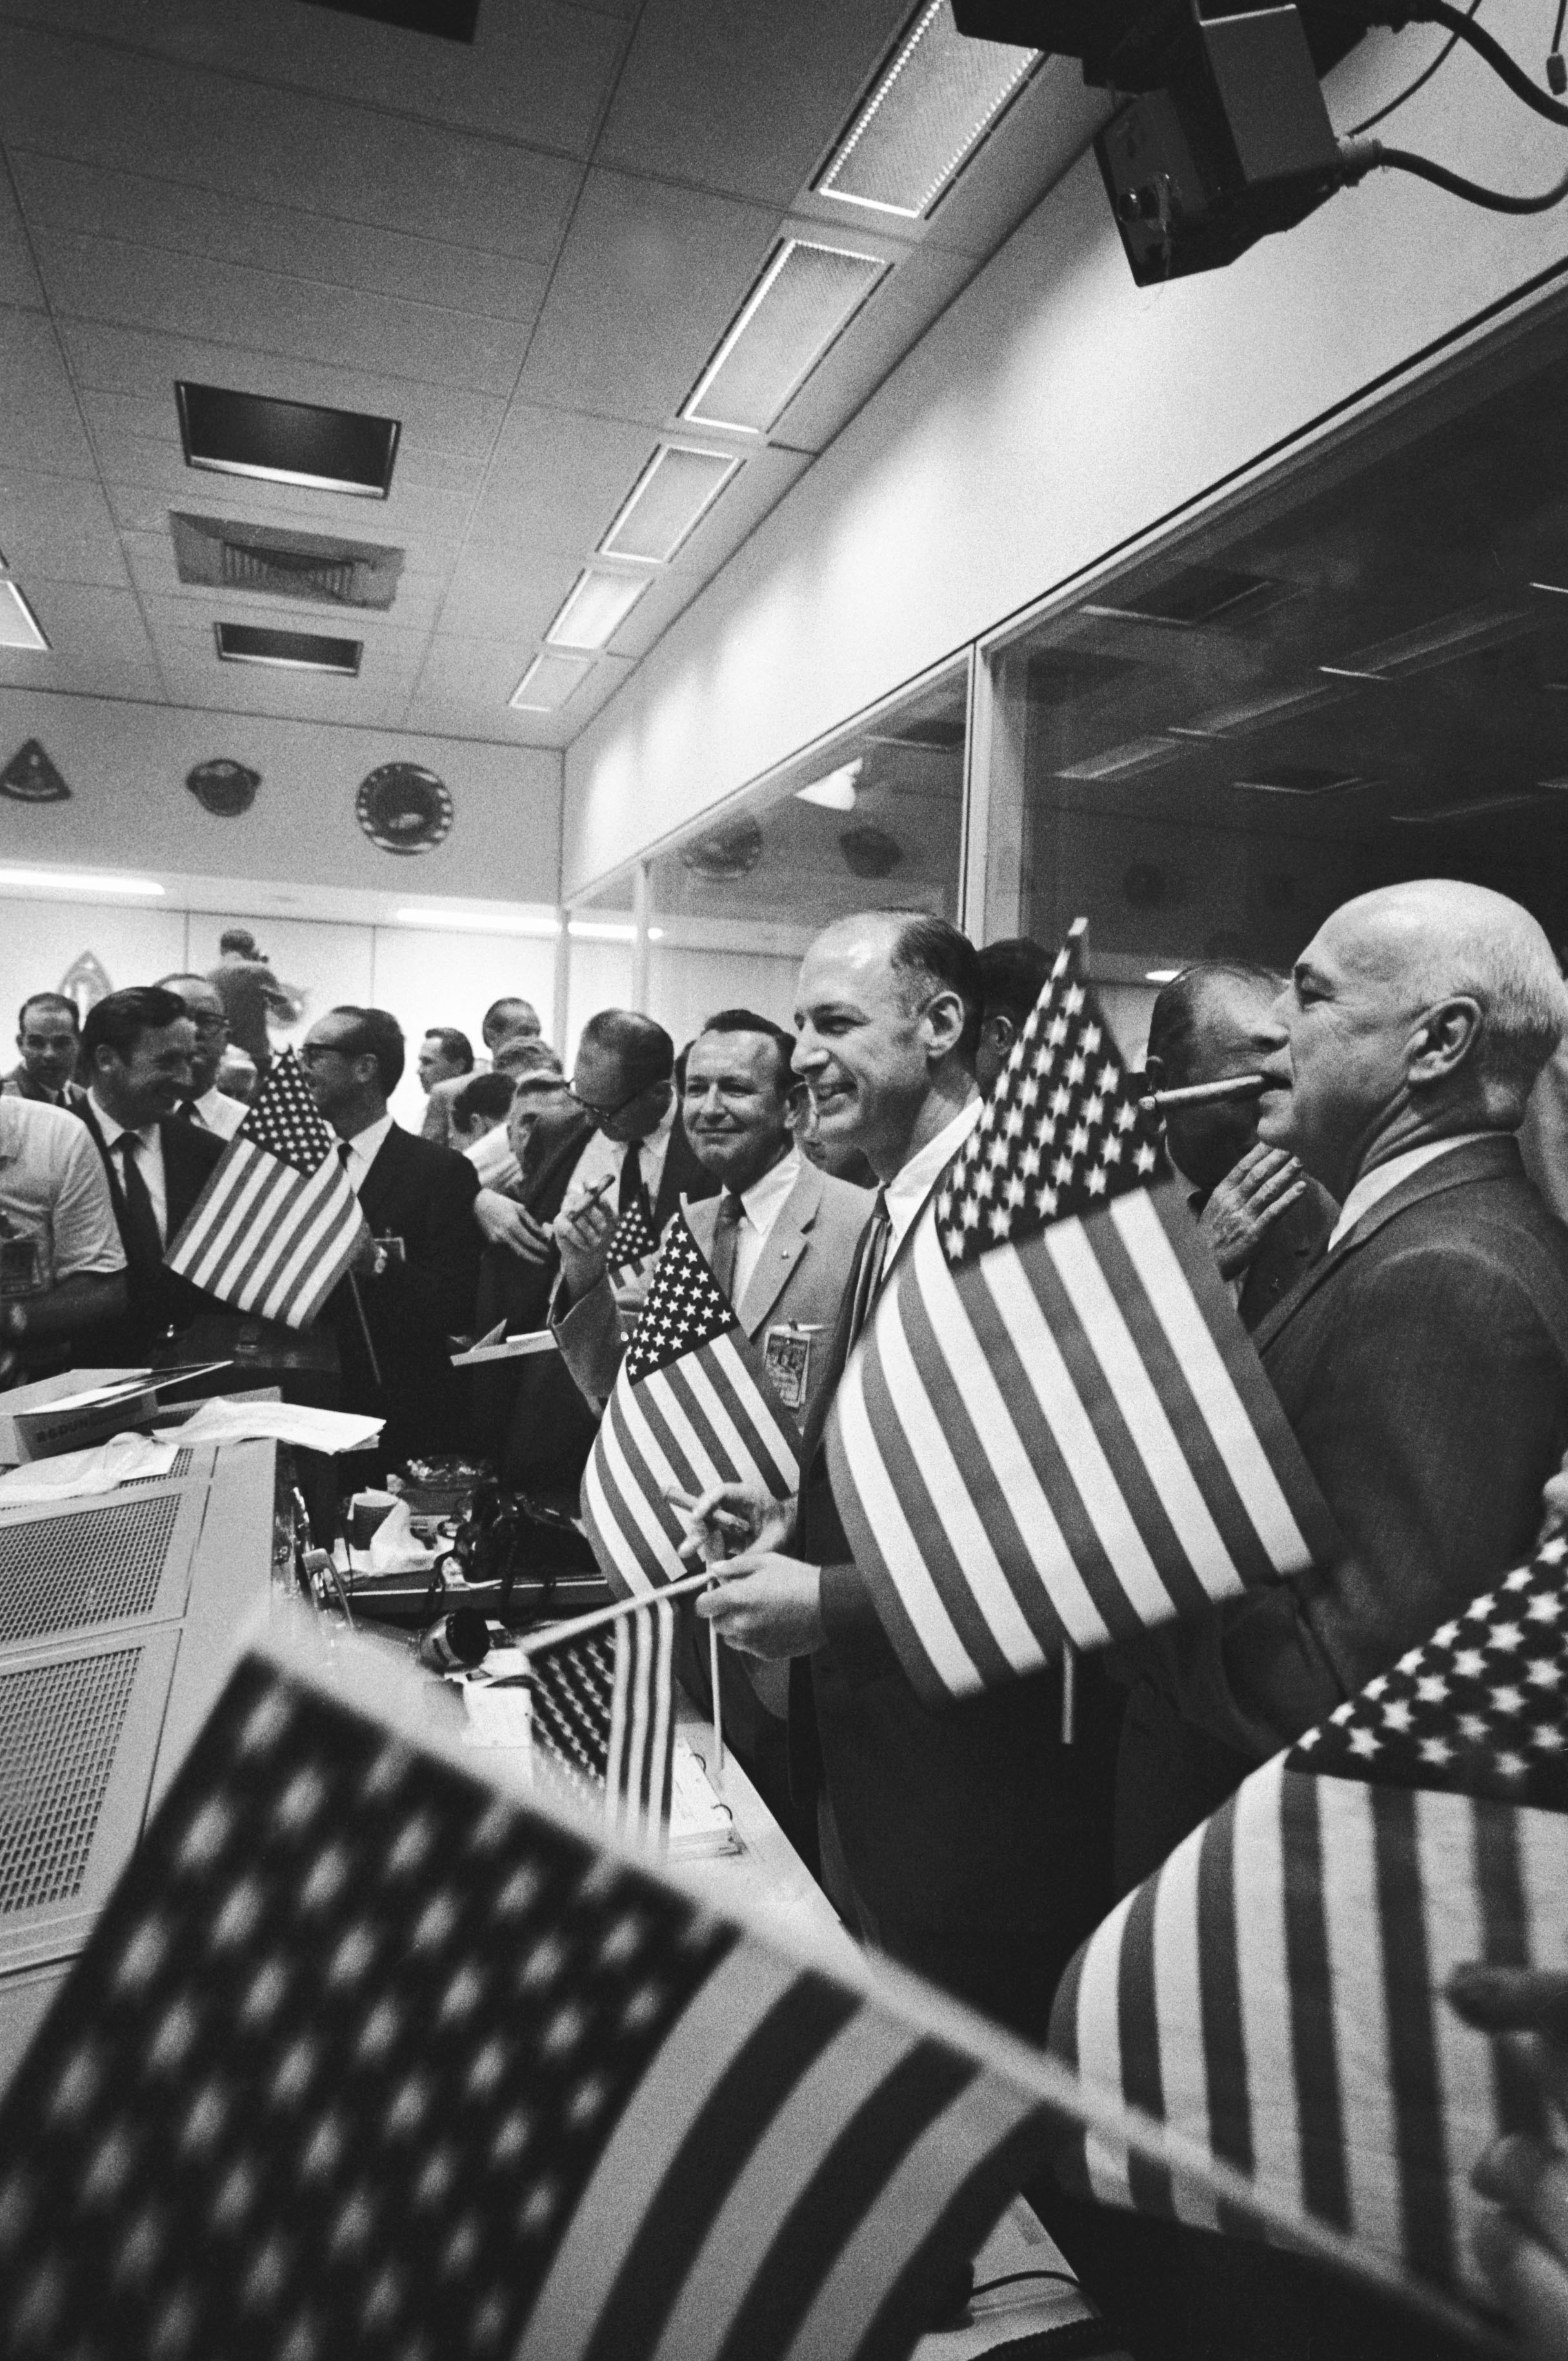 NASA and Manned Spacecraft Center (MSC, later renamed Johnson Space Center) officials join the Mission Operations Control Room flight controllers in celebrating the successful splashdown of the Apollo 11 crew. Identifiable in the foreground from right to center are MSC Director Bob Gilruth, Apollo Spacecraft Program Manager George Low, and MSC Director of Flight Operation Chris Kraft. (24 July 1969)